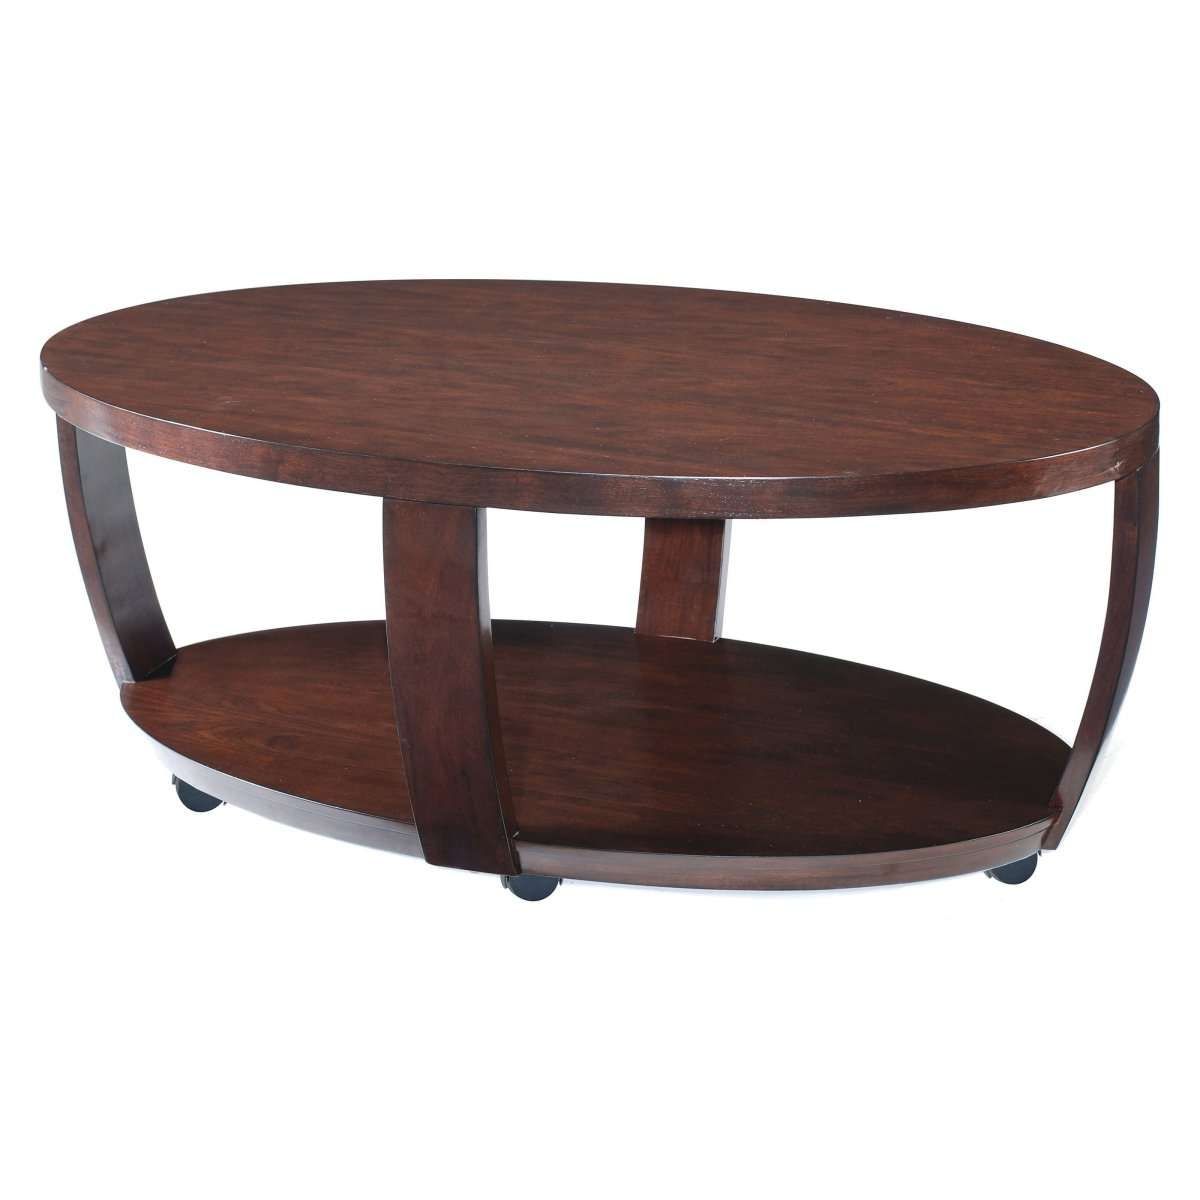 Coffee Tables : Chunky Wood Coffee Table Tables Exceptional Solid Throughout Most Current Oval Wooden Coffee Tables (View 1 of 20)